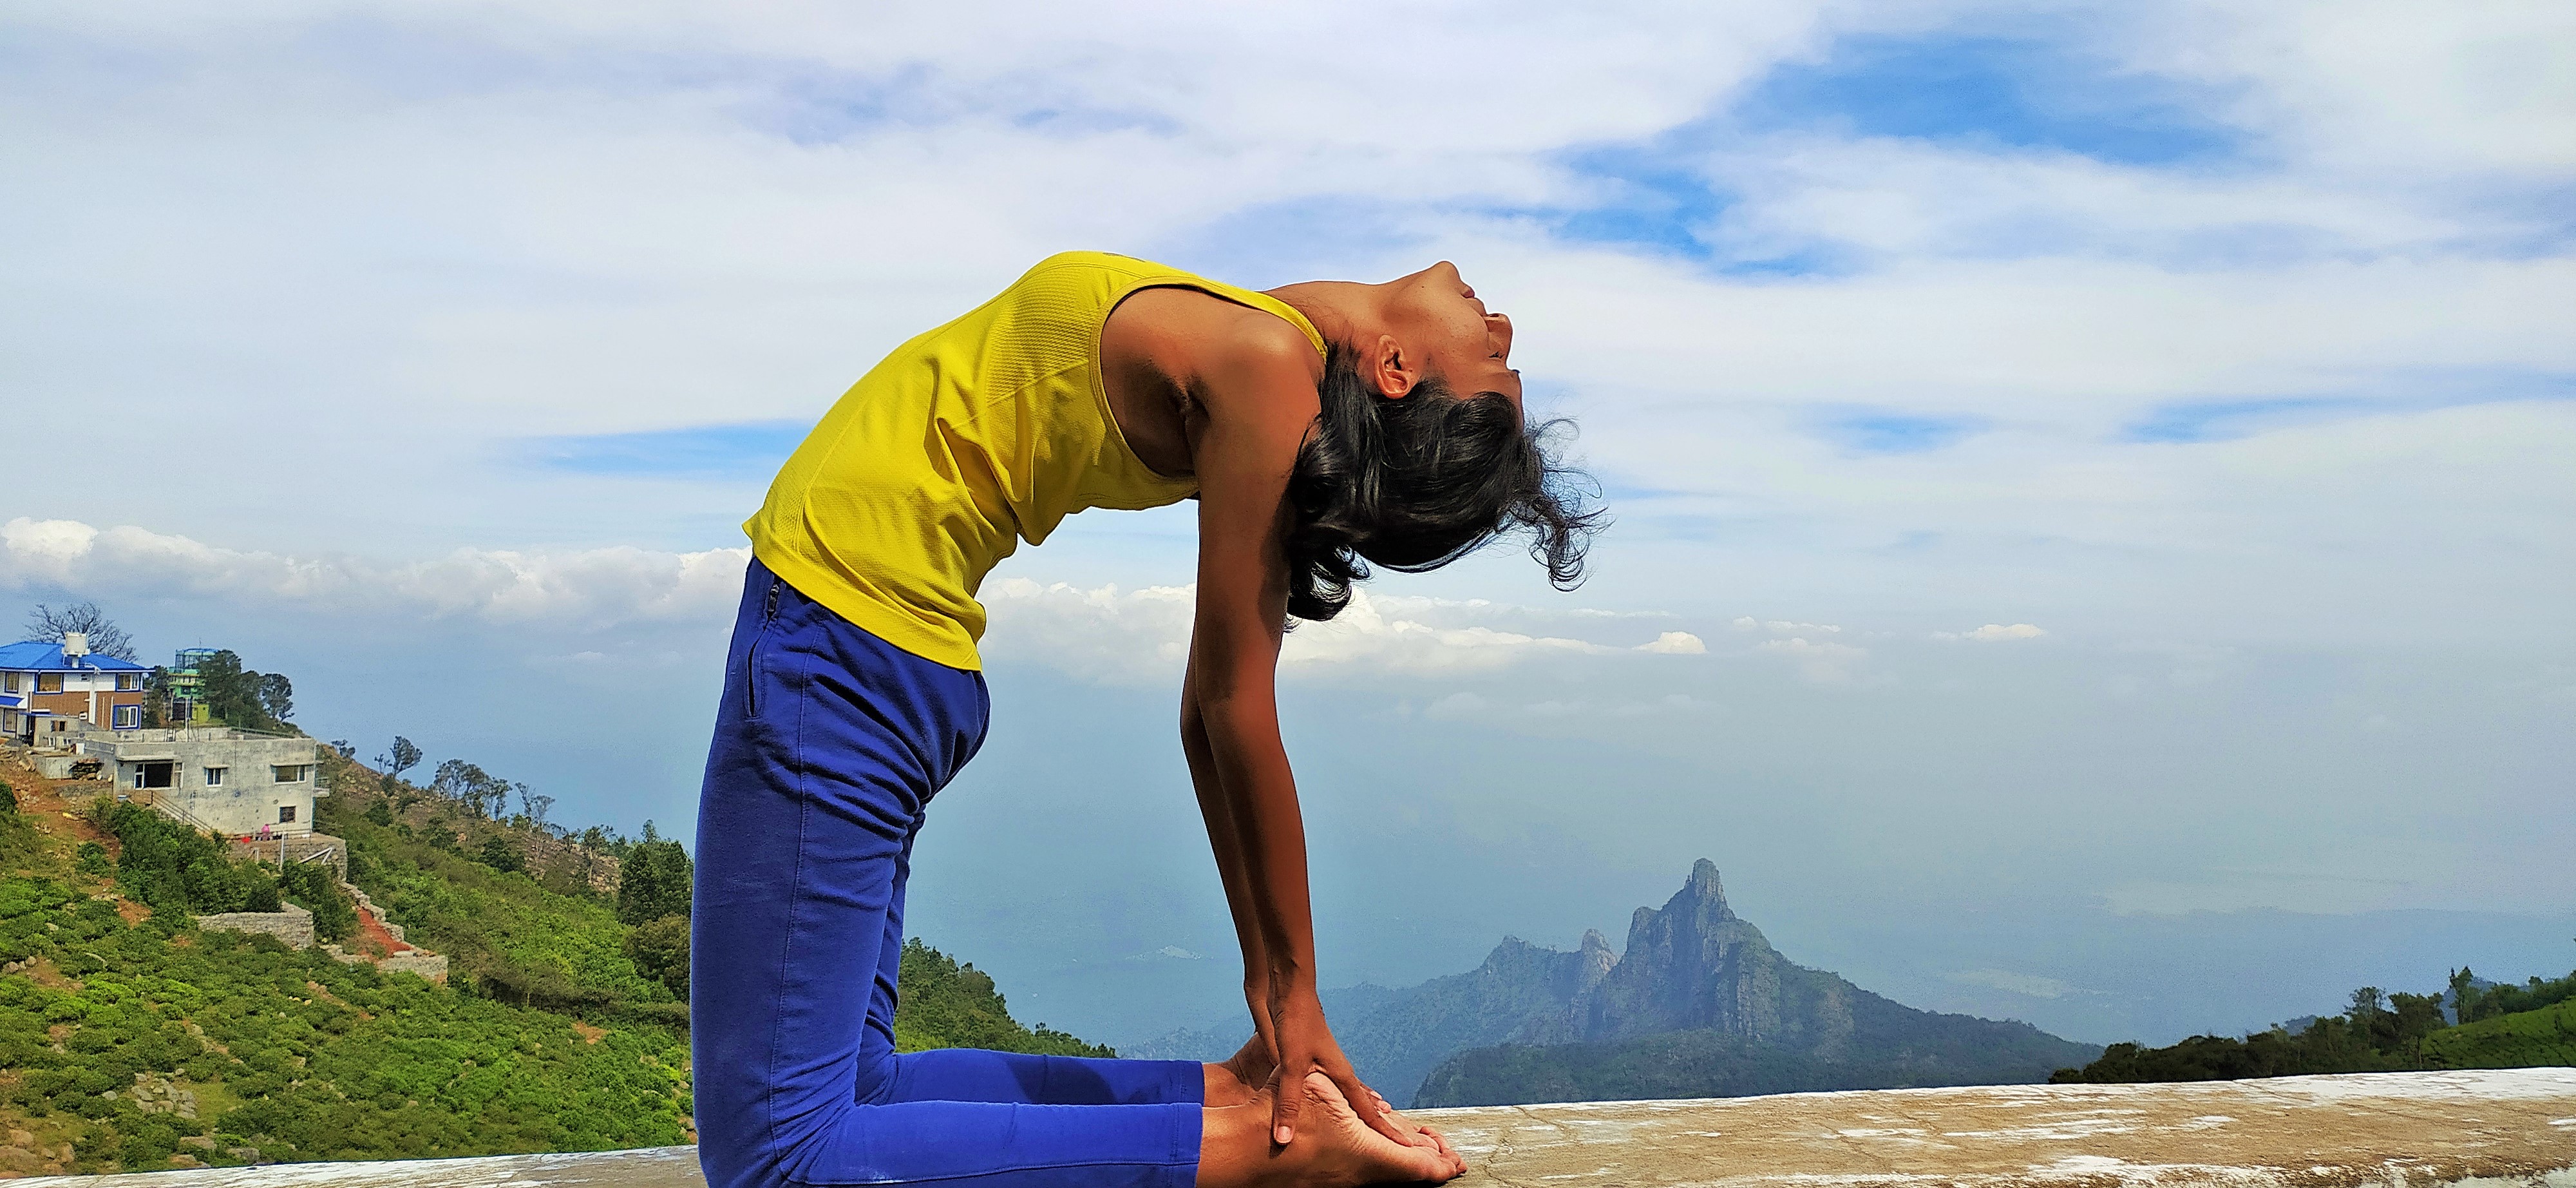 Ustrasana- The Camel Pose. Reduces fat around the waist and thighs, strengthens the spine and shoulders, increases blood circulation to the brain and improves mental sharpness, stretches and strengthens the lungs and related regions